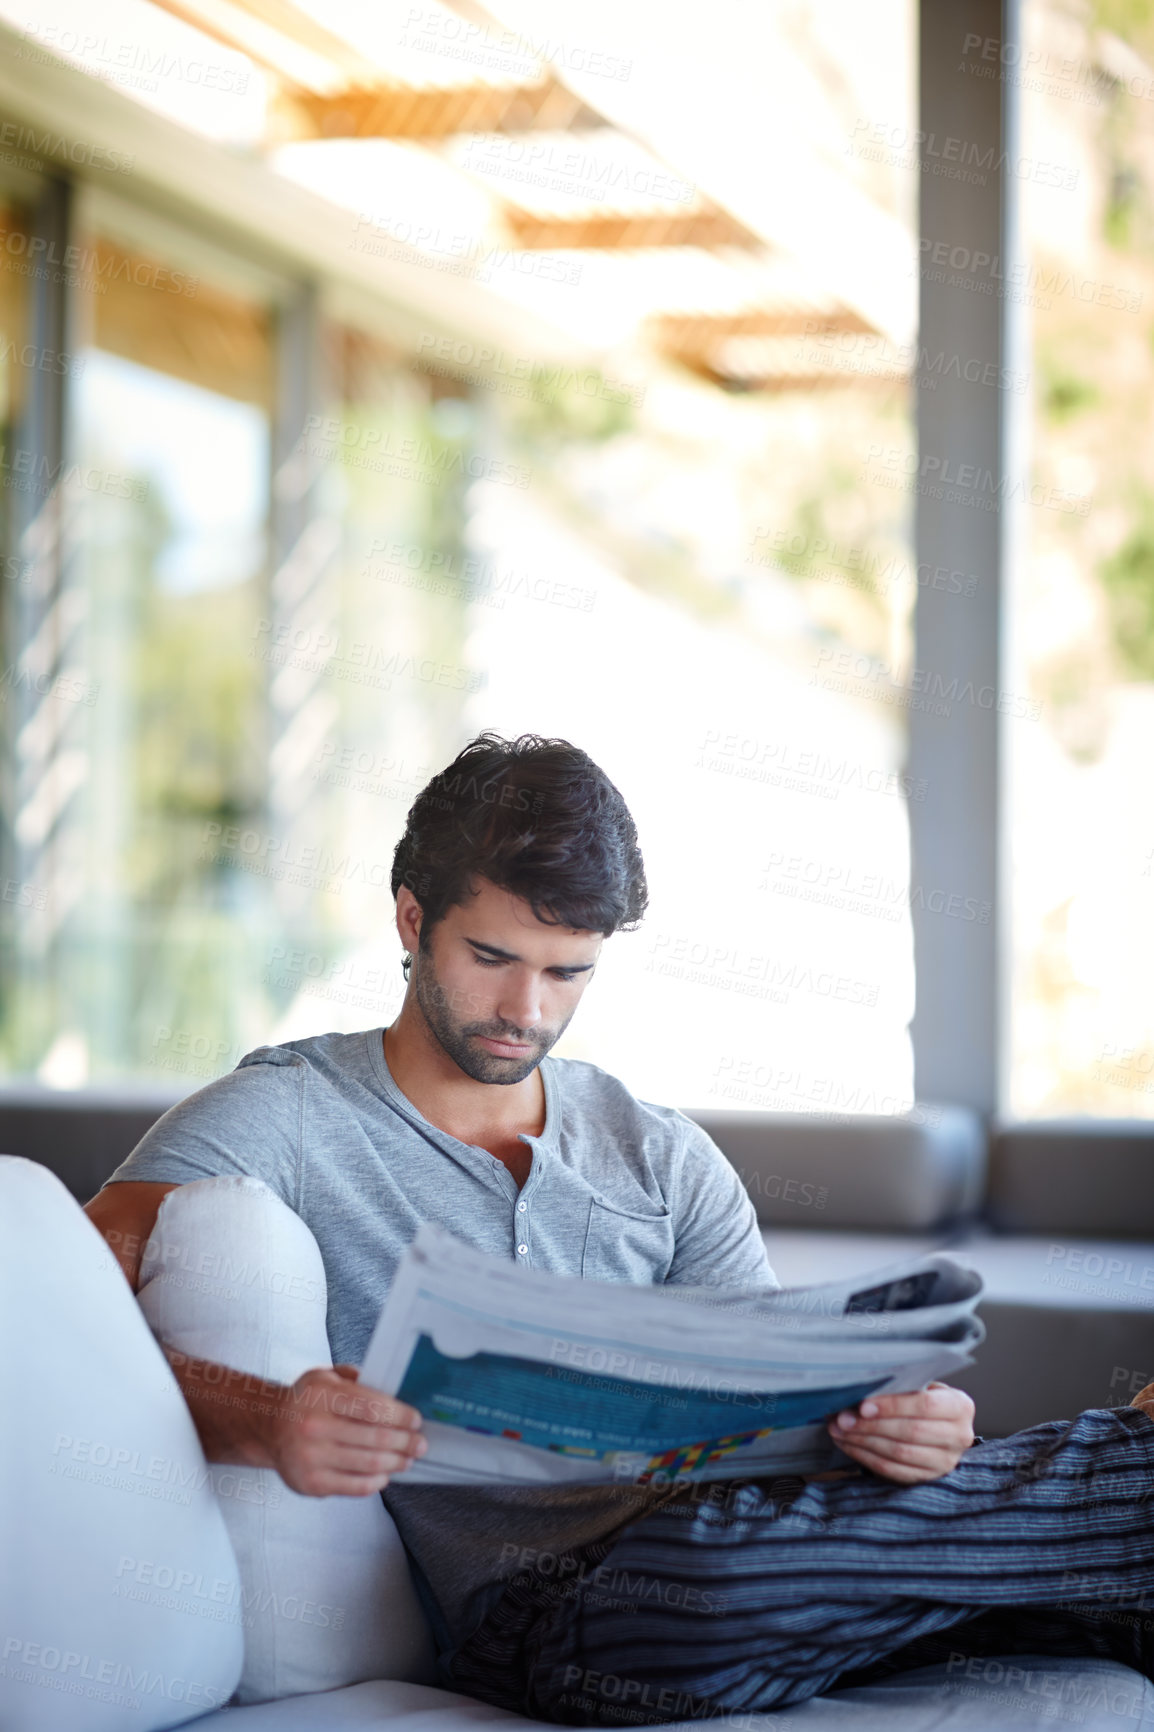 Buy stock photo Shot of a man reading his newspaper in his living room